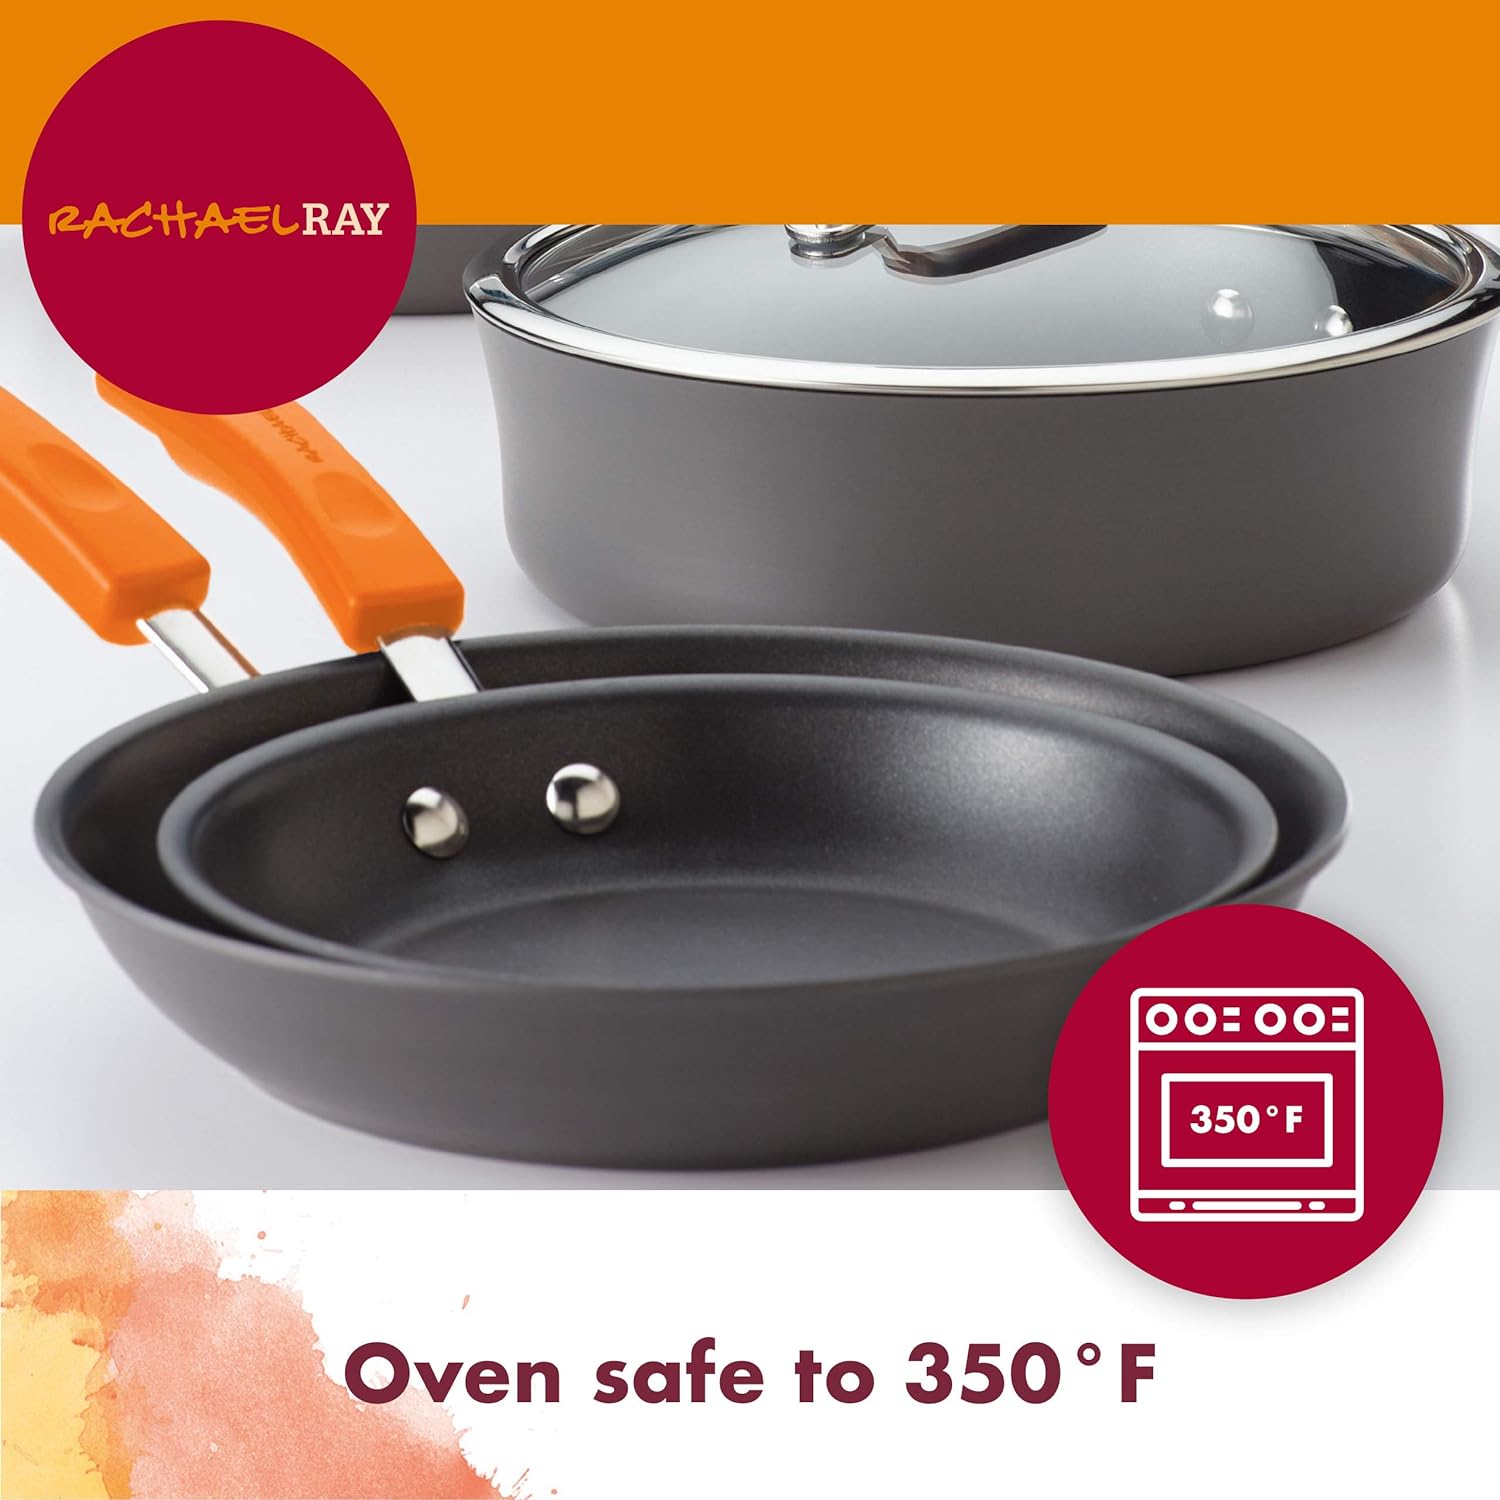 10-Piece Hard Anodized Nonstick Induction Cookware Set – Rachael Ray